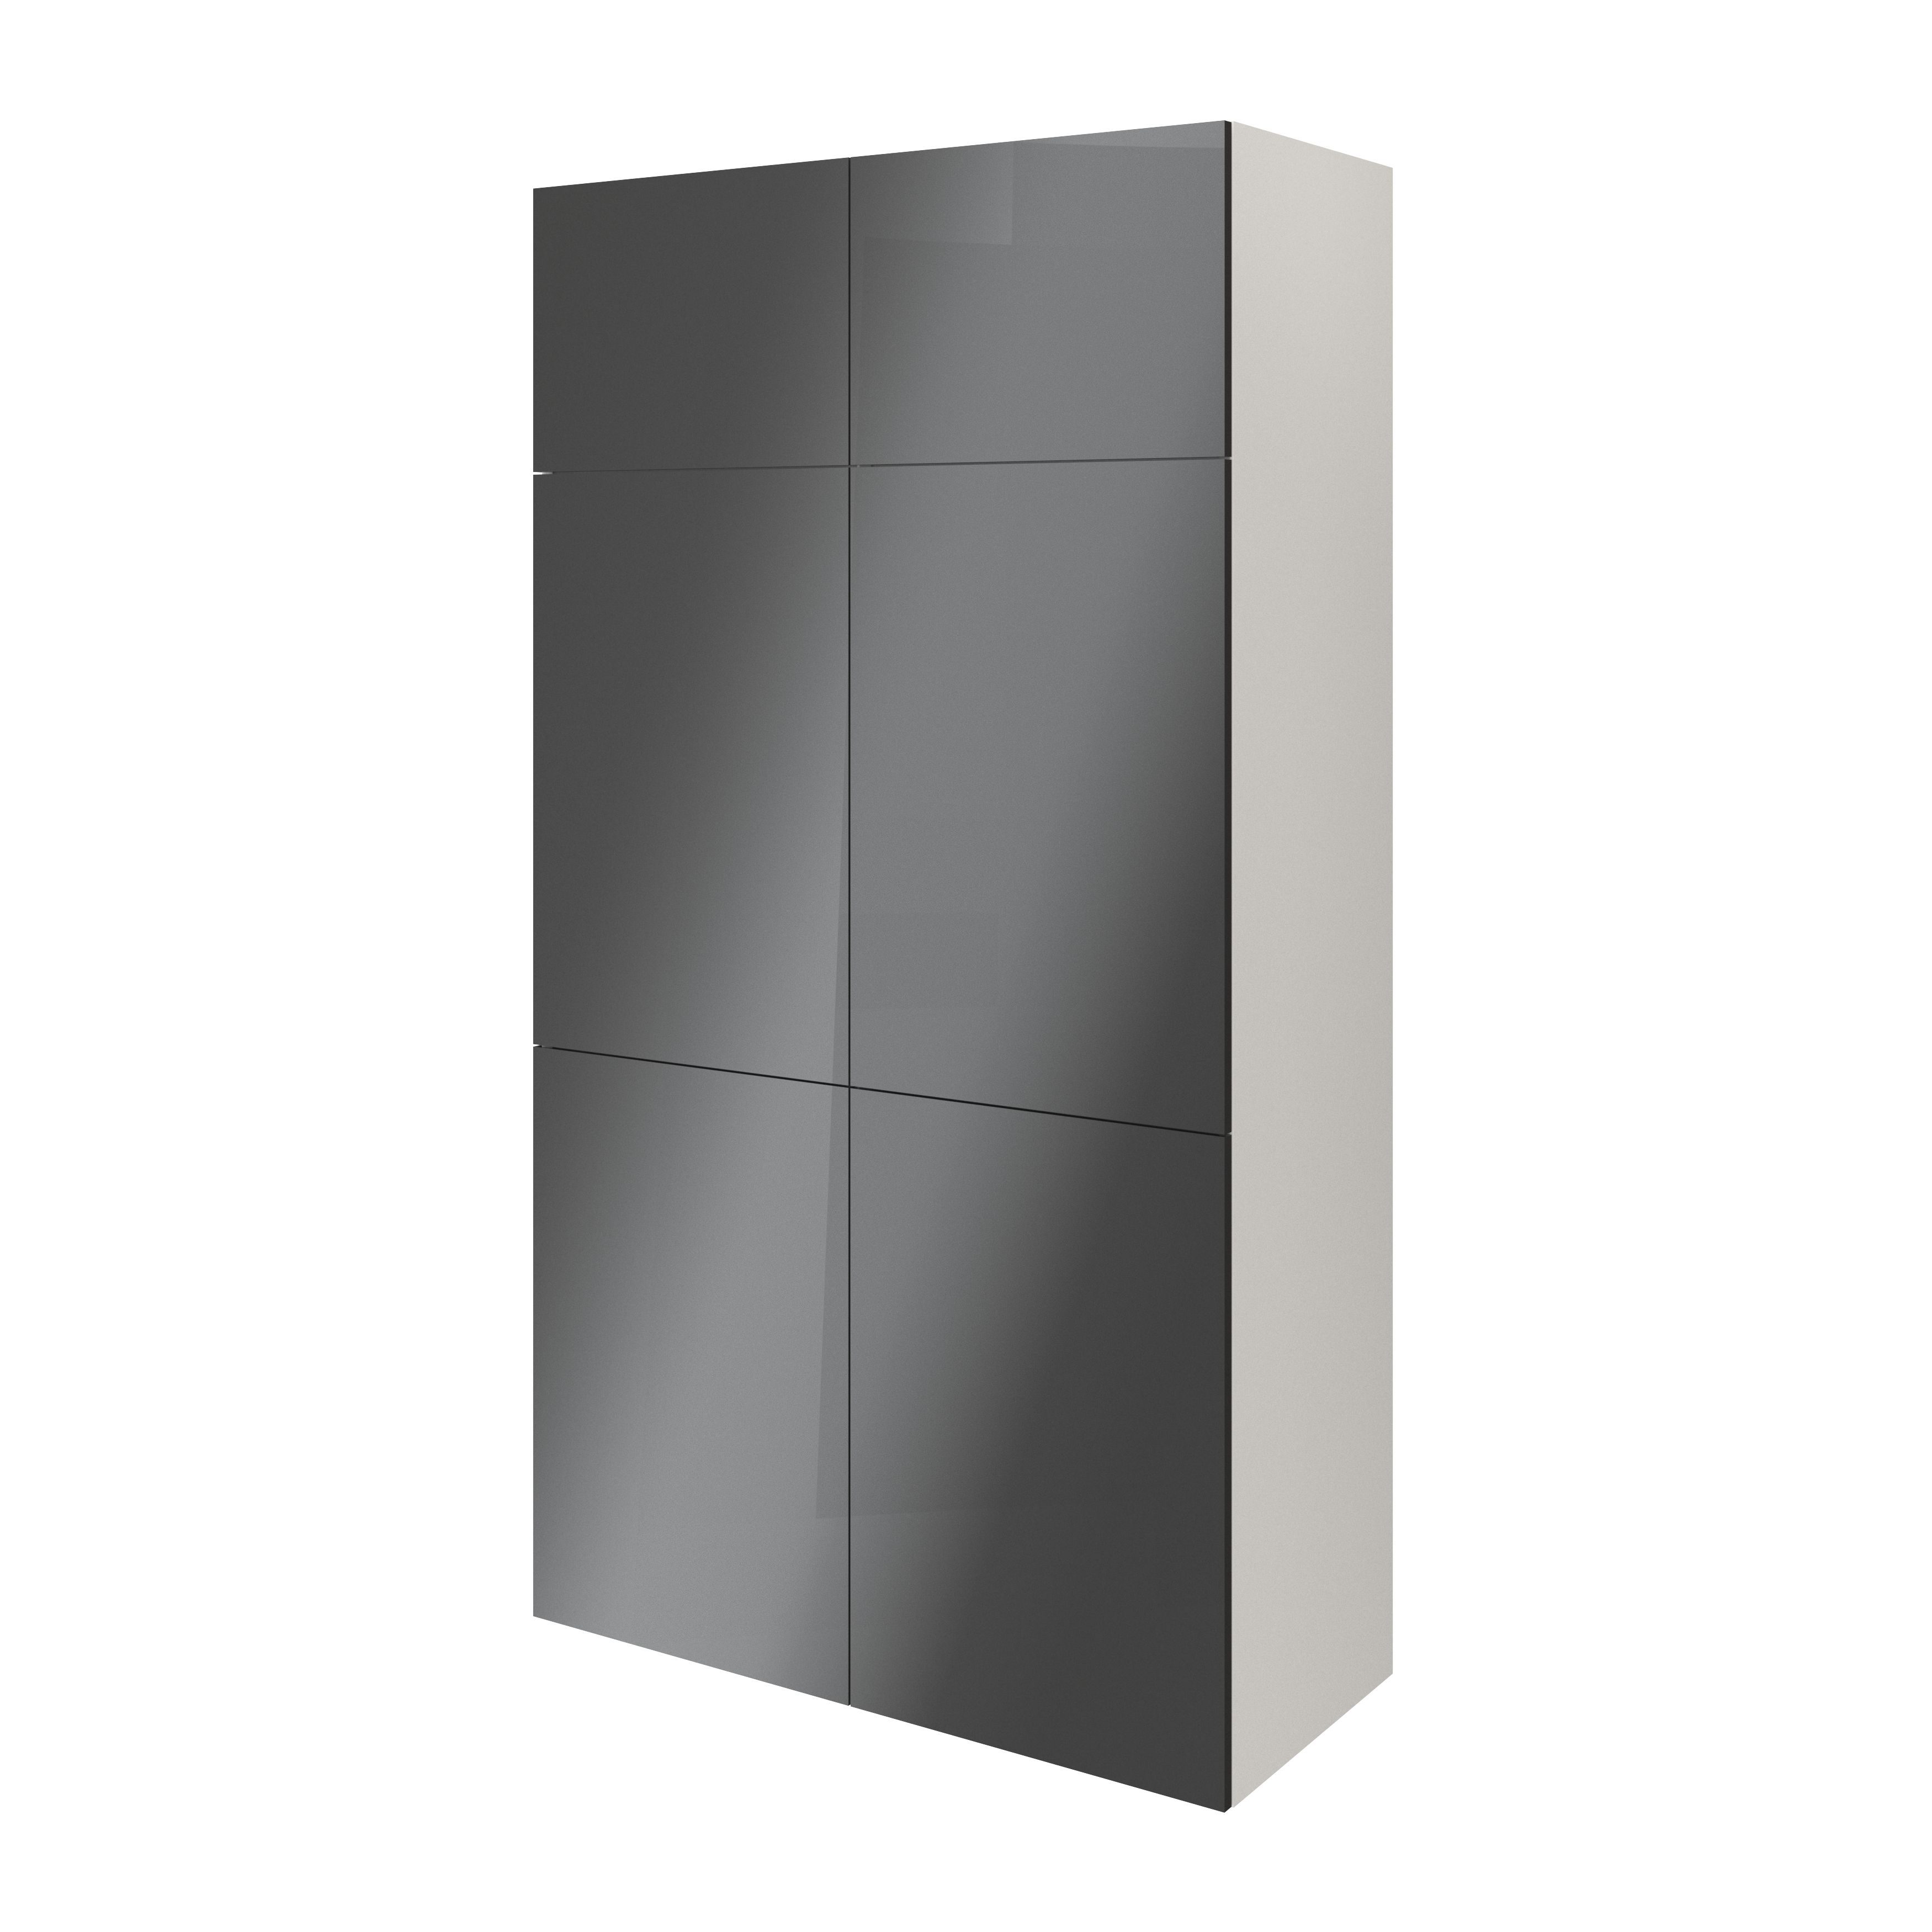 GoodHome Atomia Gloss Anthracite Non-mirrored Modular furniture door, (H) 372mm (W) 497mm